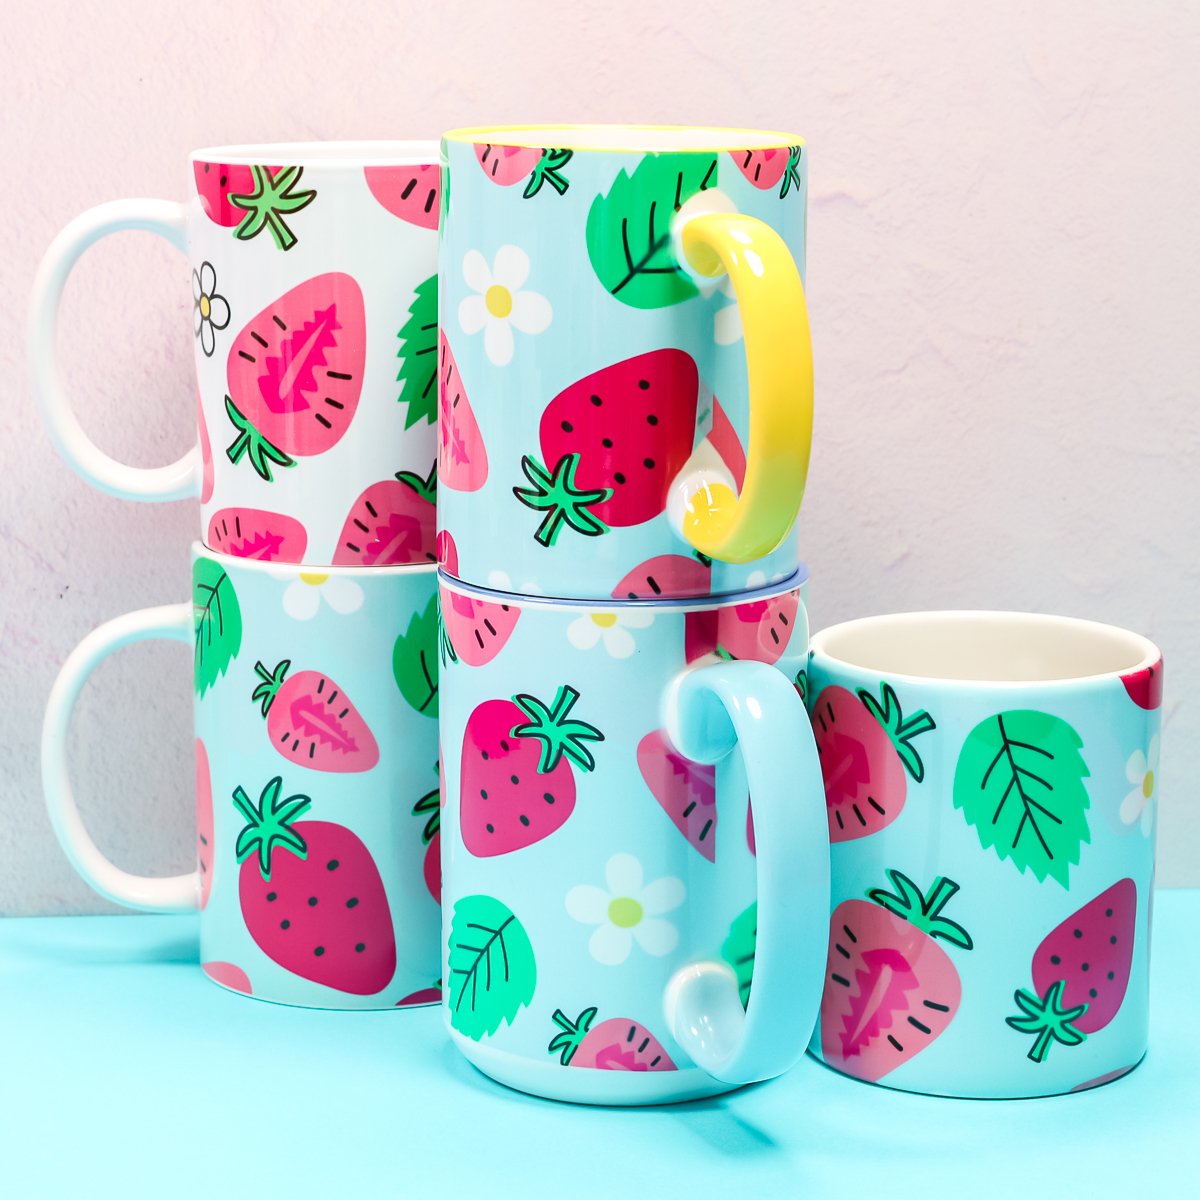 How to Make Full Wrap Sublimation Mugs - Angie Holden The Country